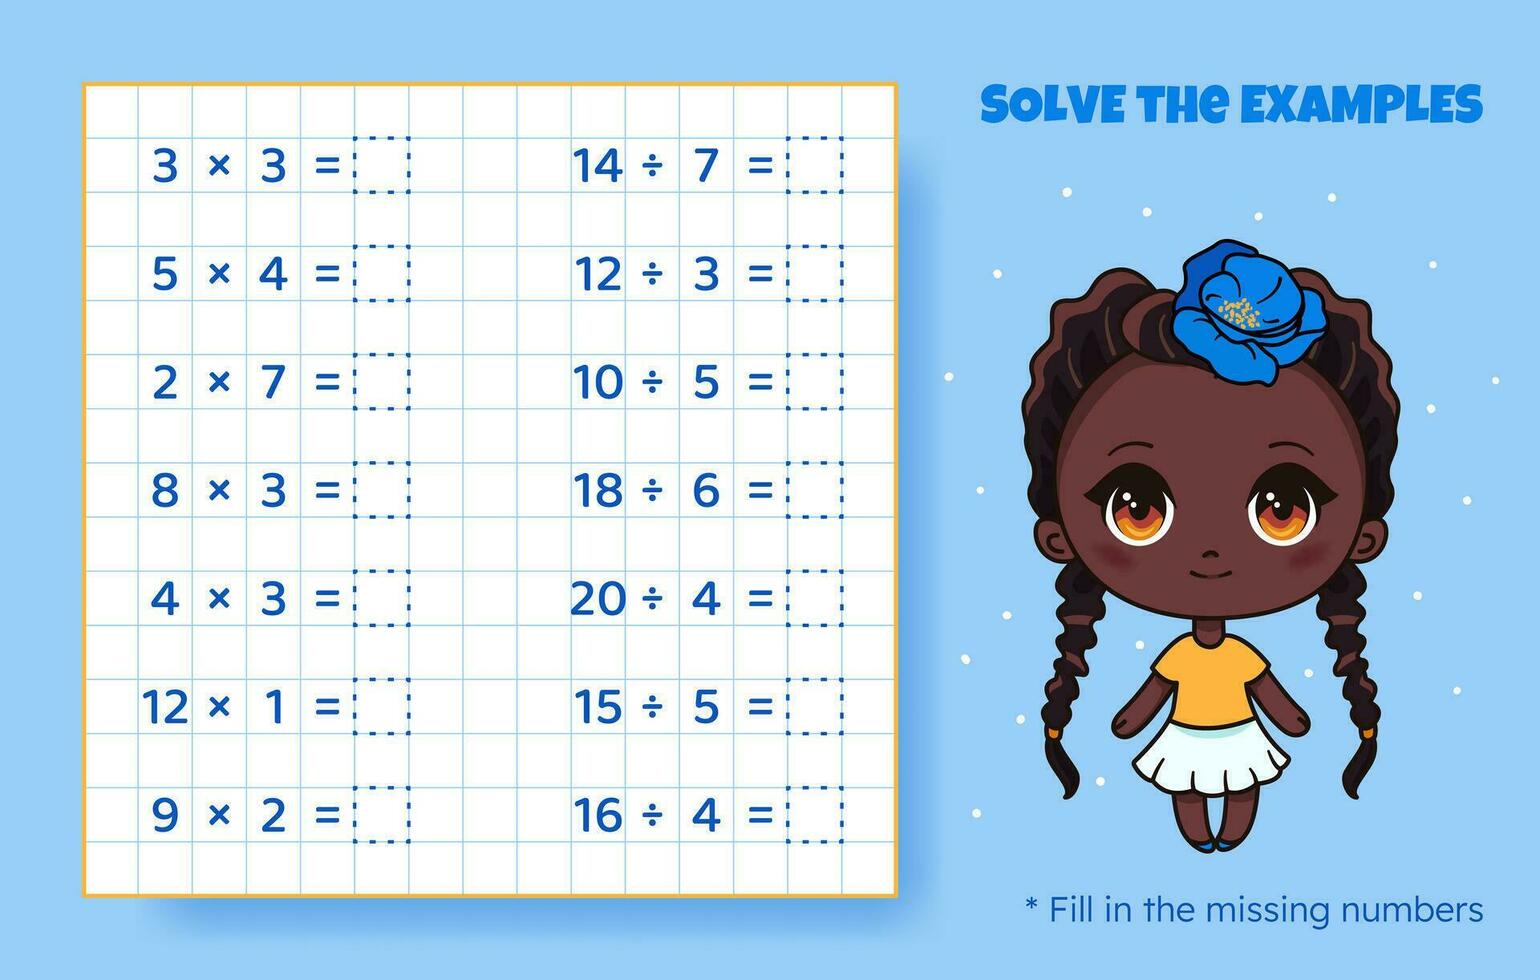 Solve the examples. Multiplication and division up to 20. Mathematical puzzle game. Worksheet for preschool kids. Vector illustration. Cartoon educational game with cute anime girl for children.